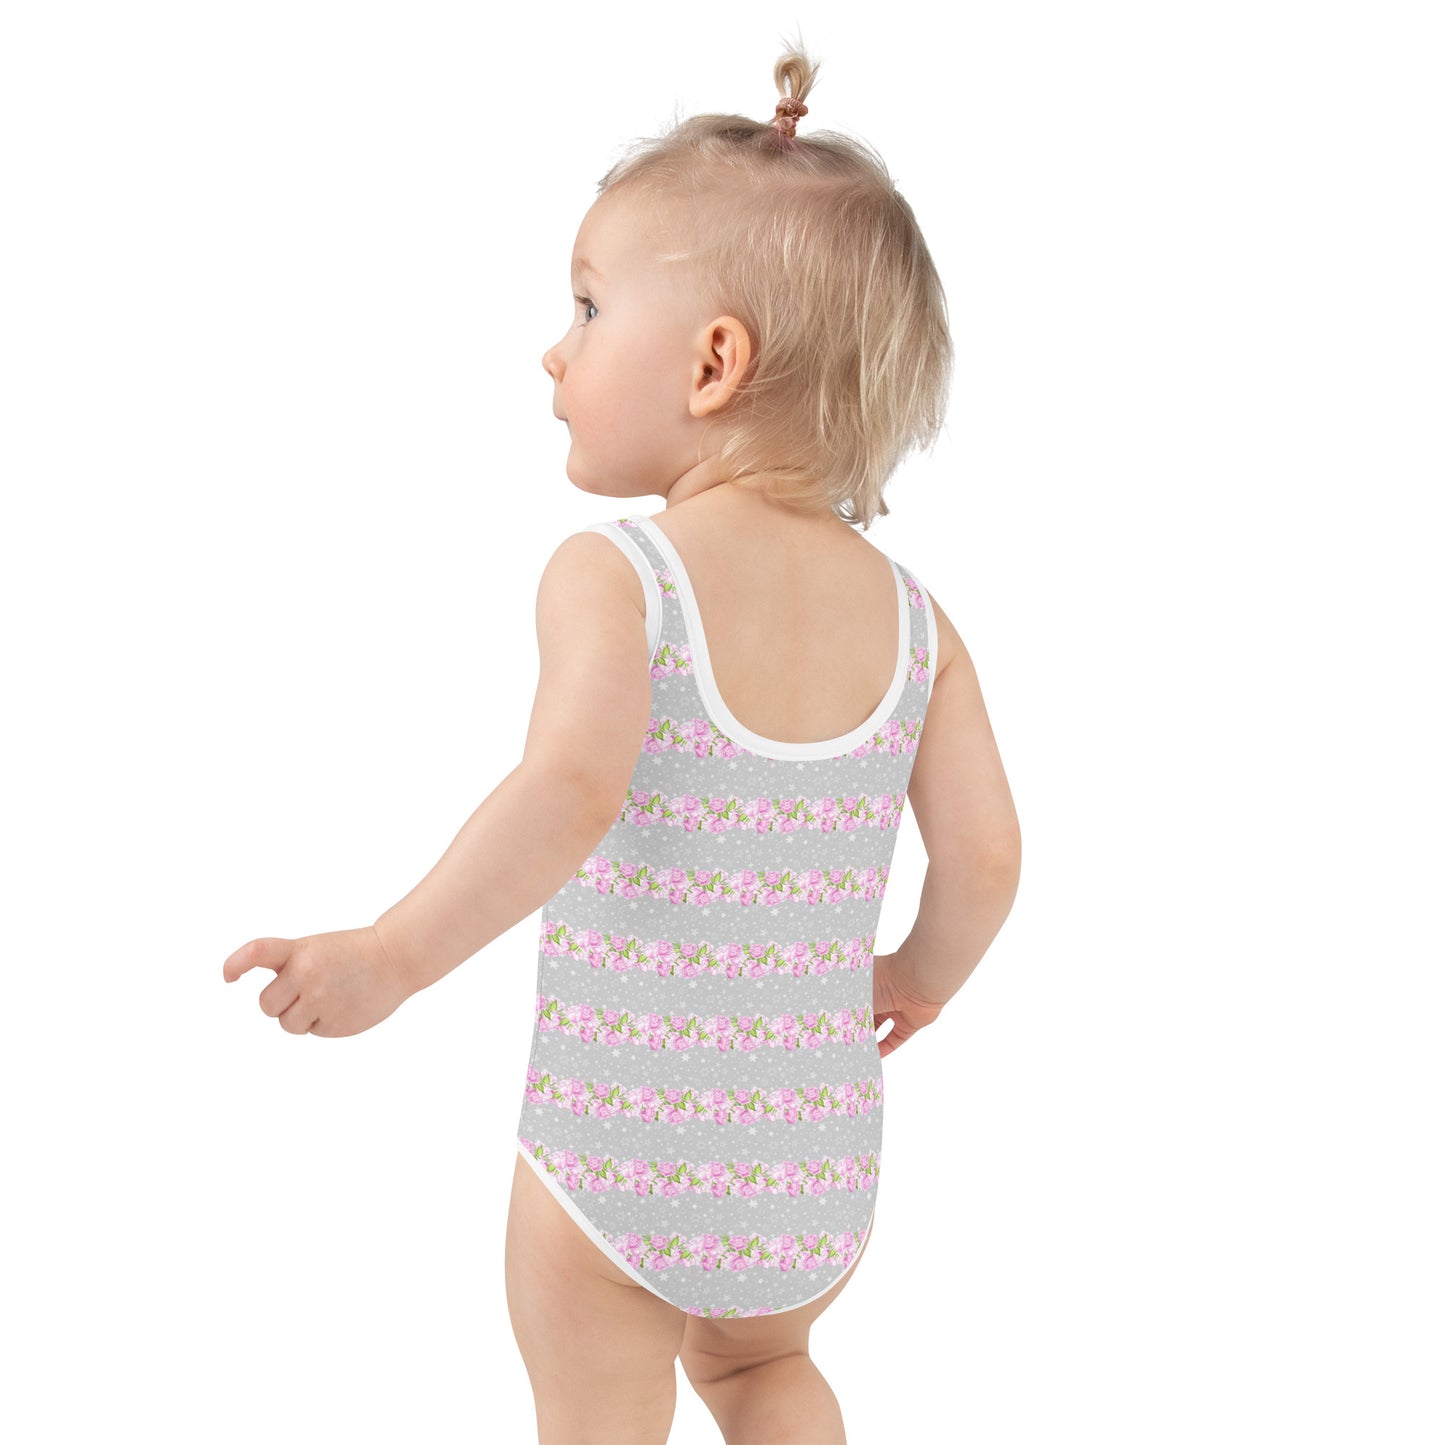 Rows of Pink Roses - Kids Swimsuit